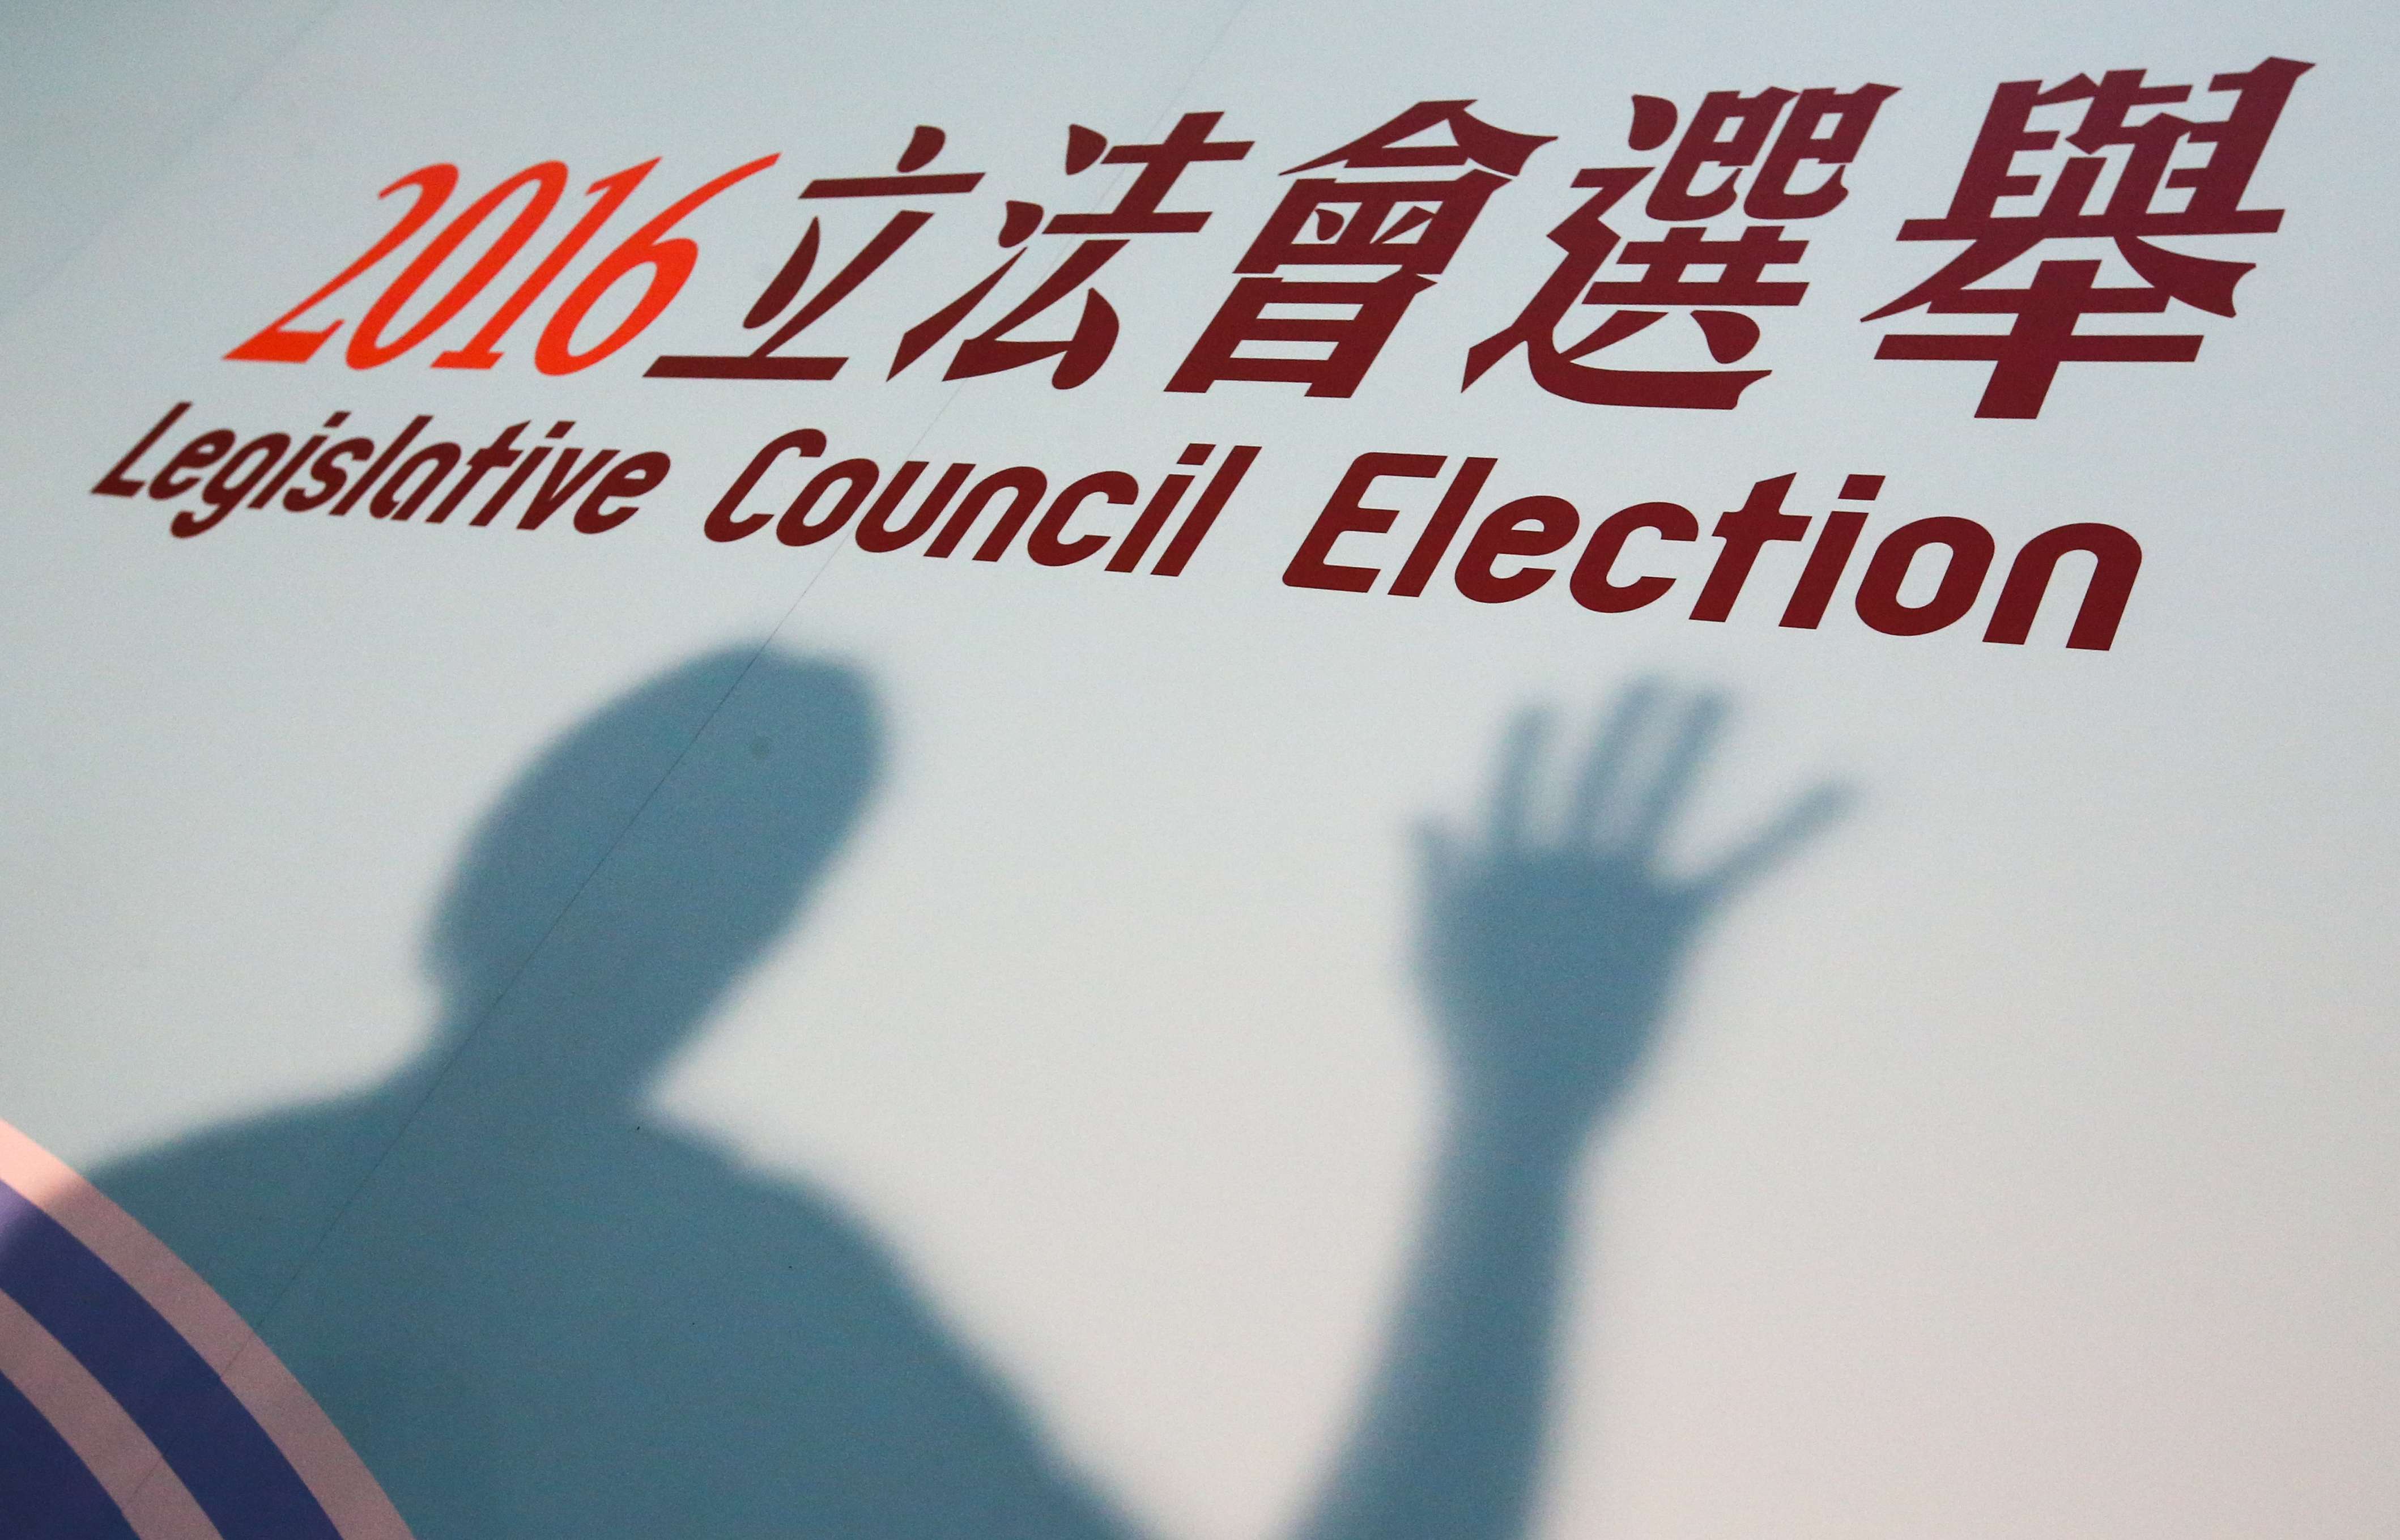 Arrests linked to vote-rigging in one of the trade-based seats in the Legislative Council have tarnished the city’s reputation for clean elections. Photo: Felix Wong